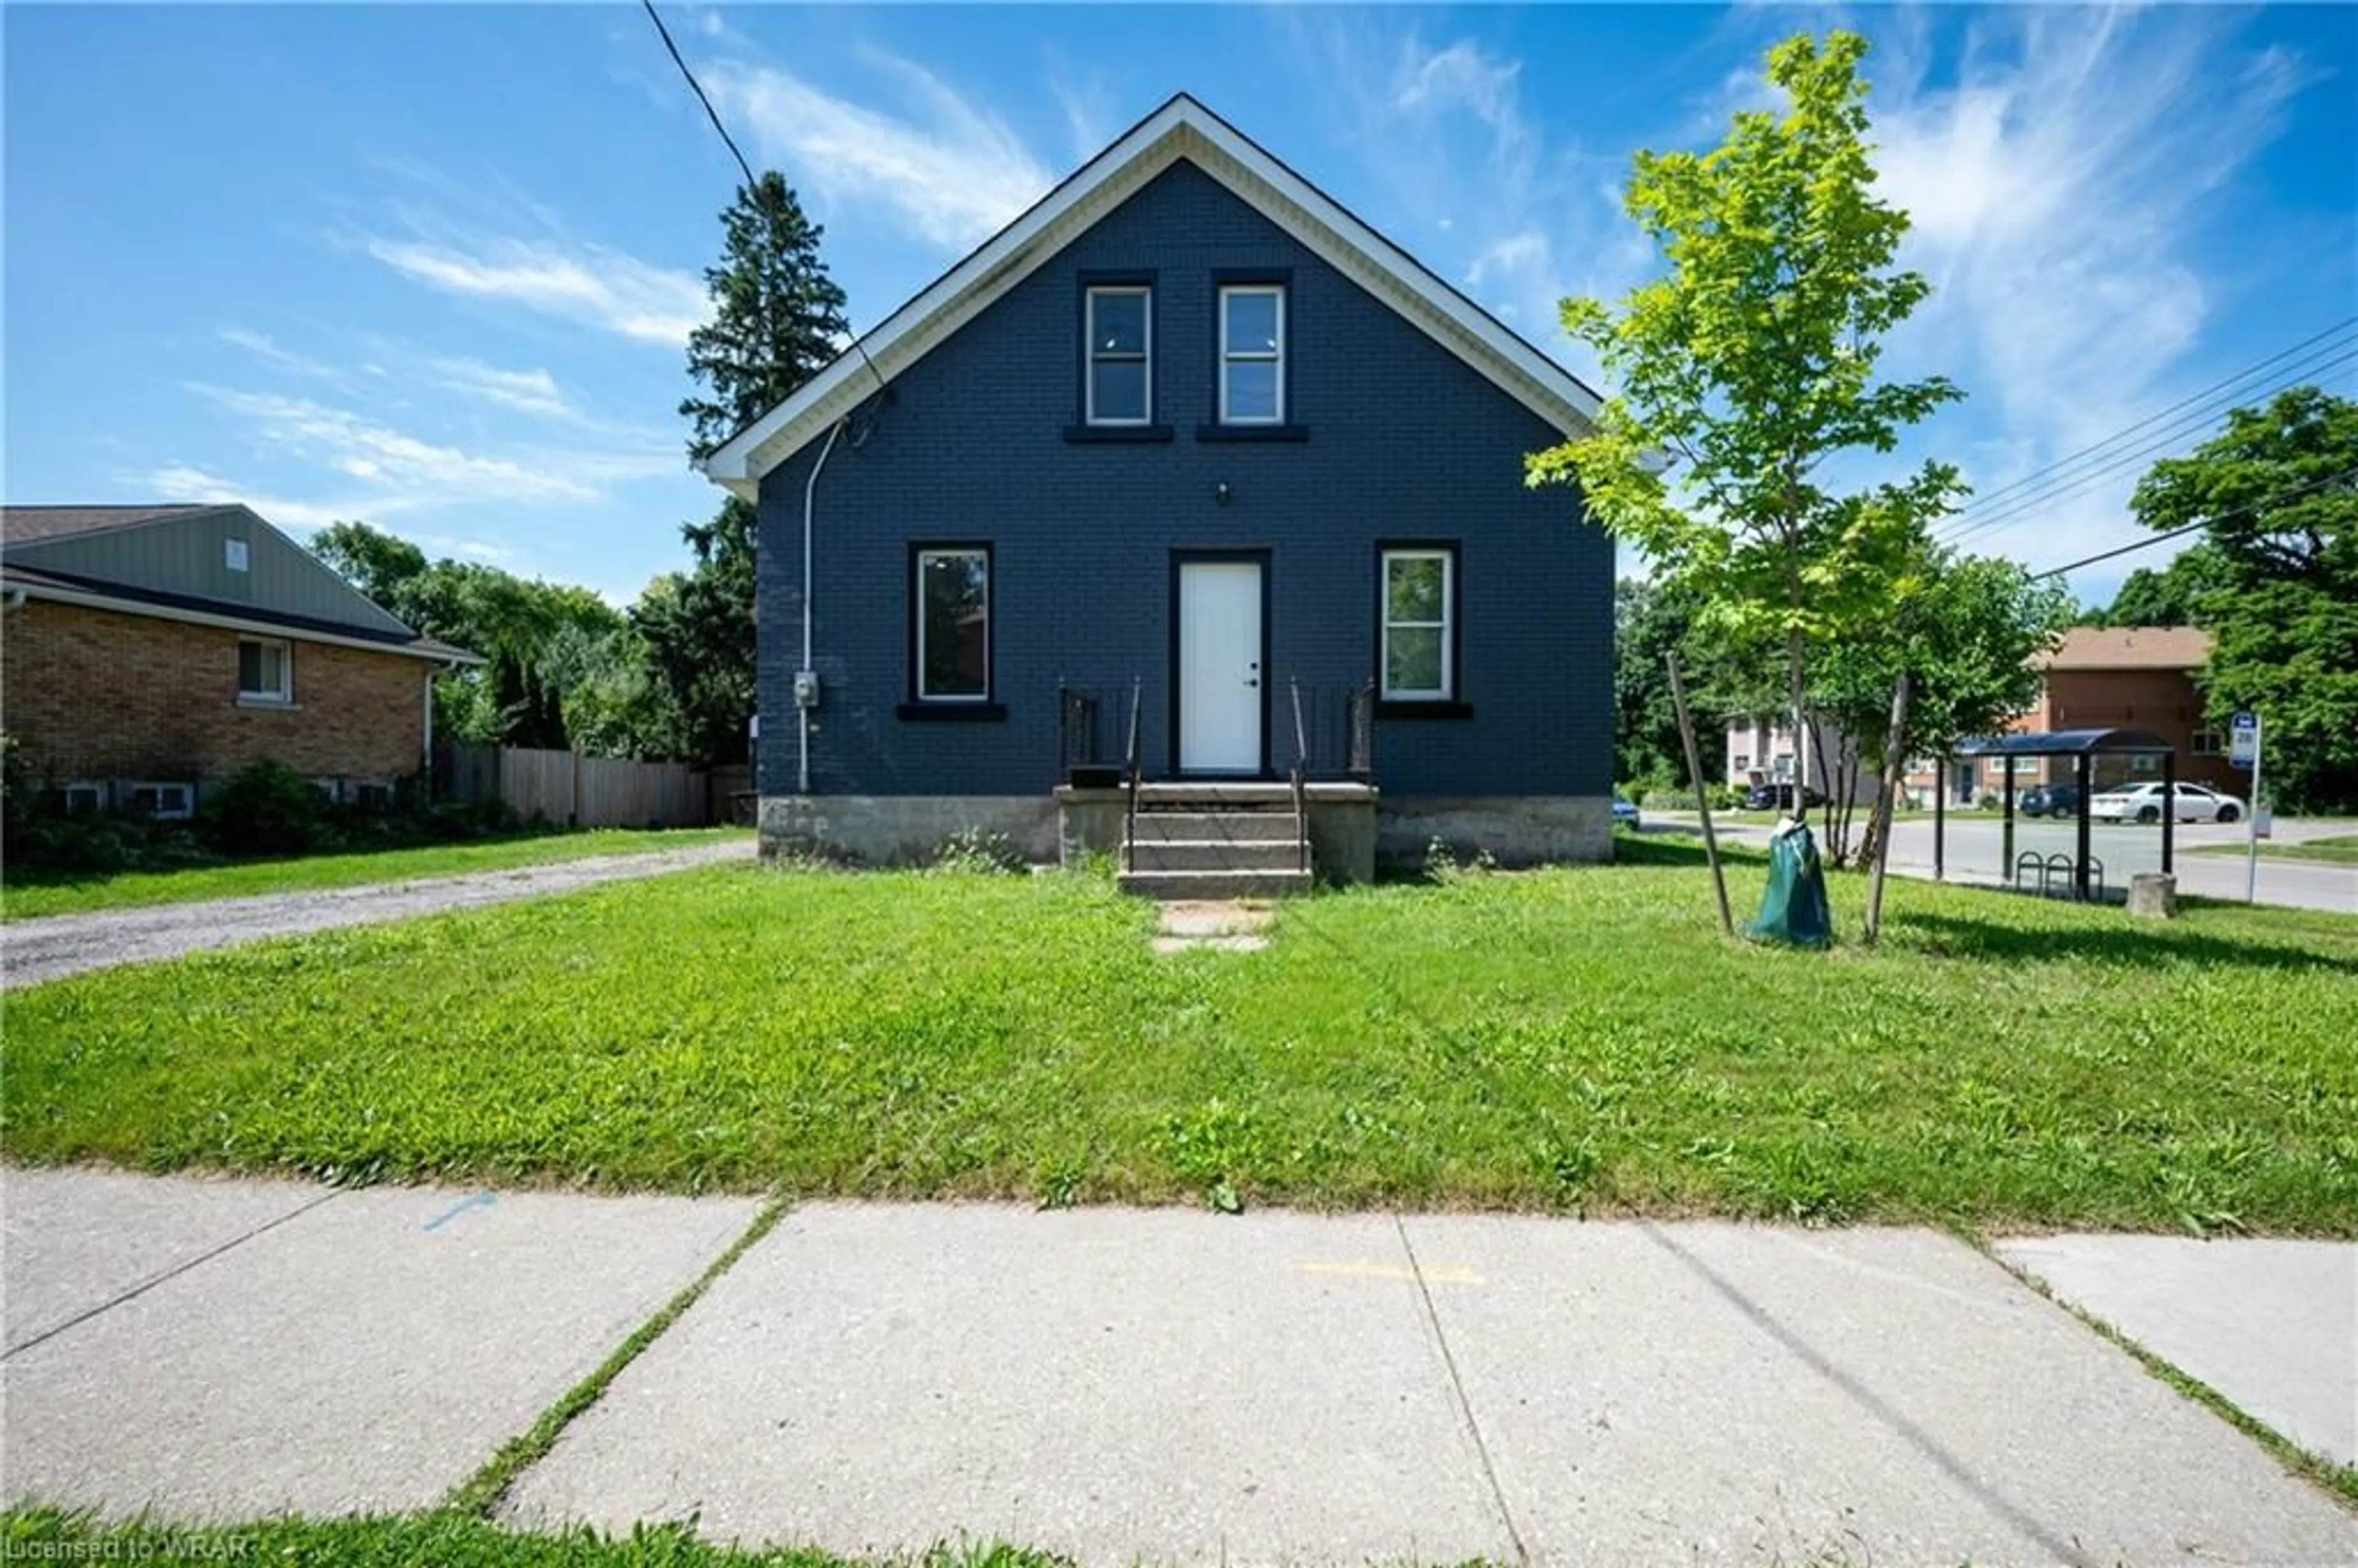 Frontside or backside of a home for 243 Connaught St, Kitchener Ontario N2C 1B4